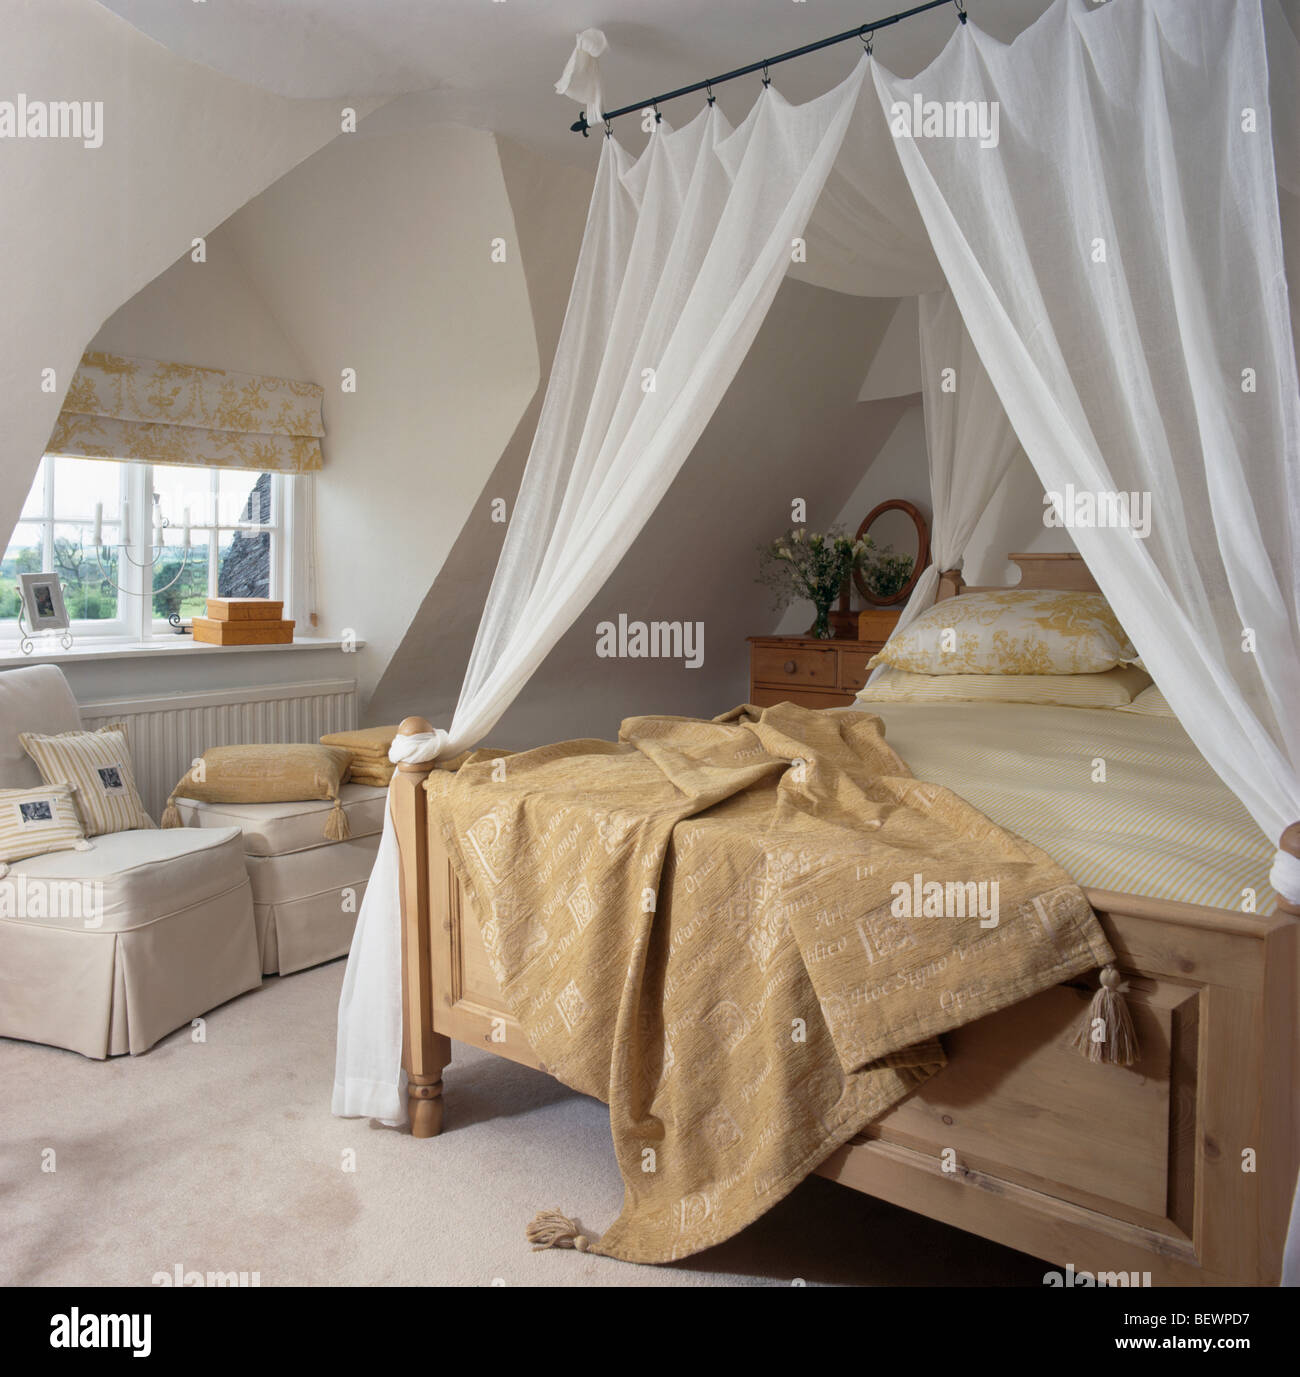 Beige chenille throw on wooden bed with white drapes in cream attic bedroom with dormer window Stock Photo